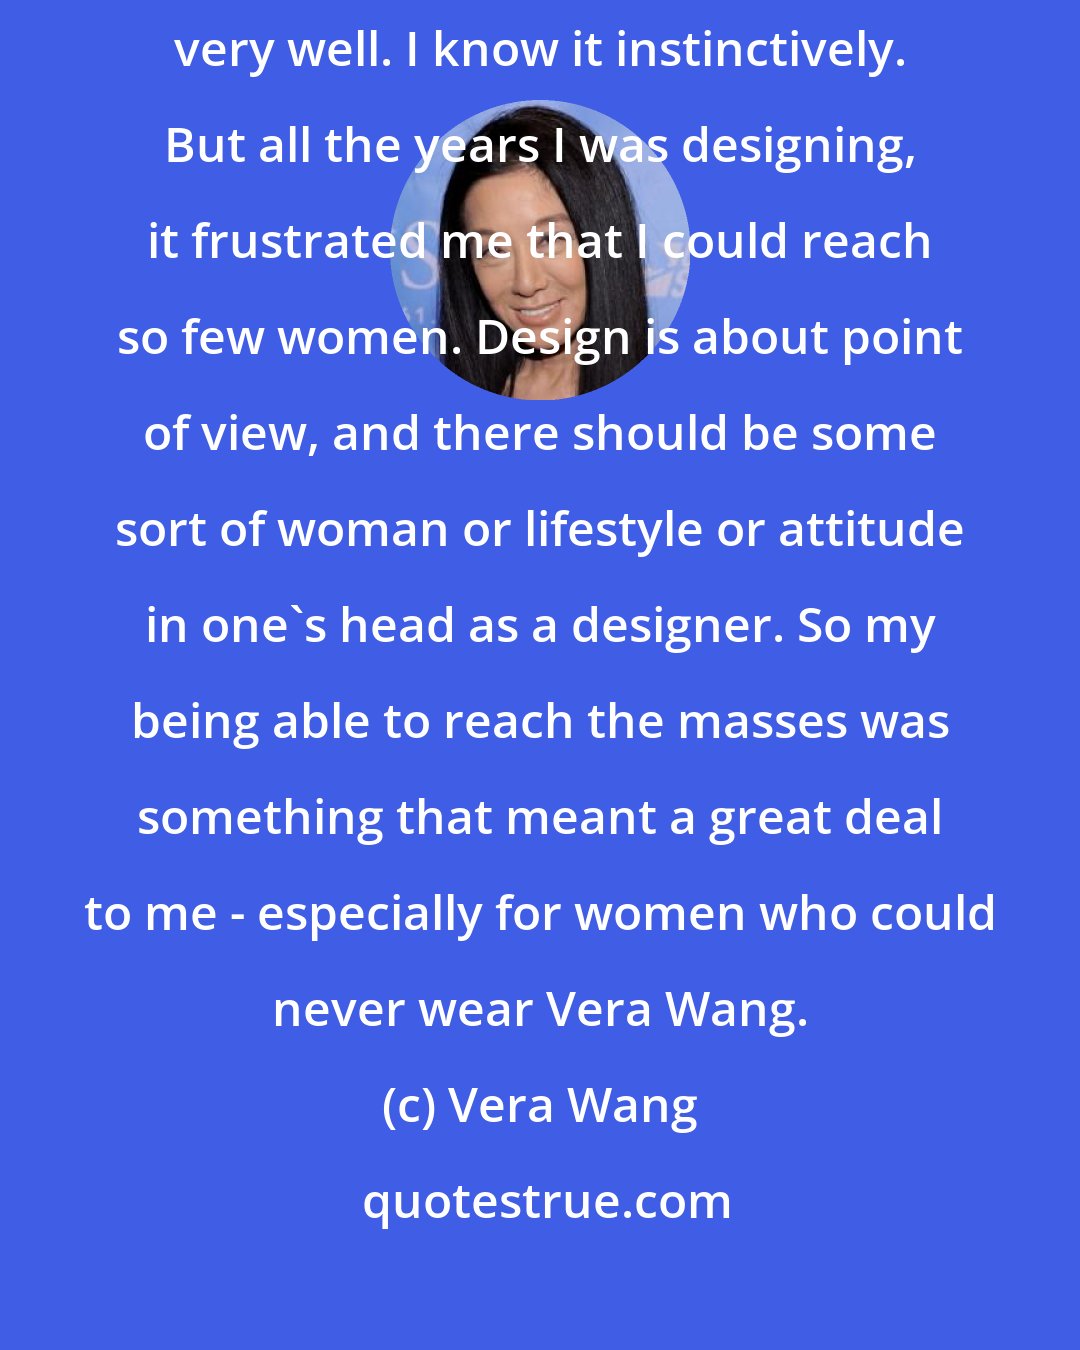 Vera Wang: I started at the very highest level so the upper end is something I know very well. I know it instinctively. But all the years I was designing, it frustrated me that I could reach so few women. Design is about point of view, and there should be some sort of woman or lifestyle or attitude in one's head as a designer. So my being able to reach the masses was something that meant a great deal to me - especially for women who could never wear Vera Wang.